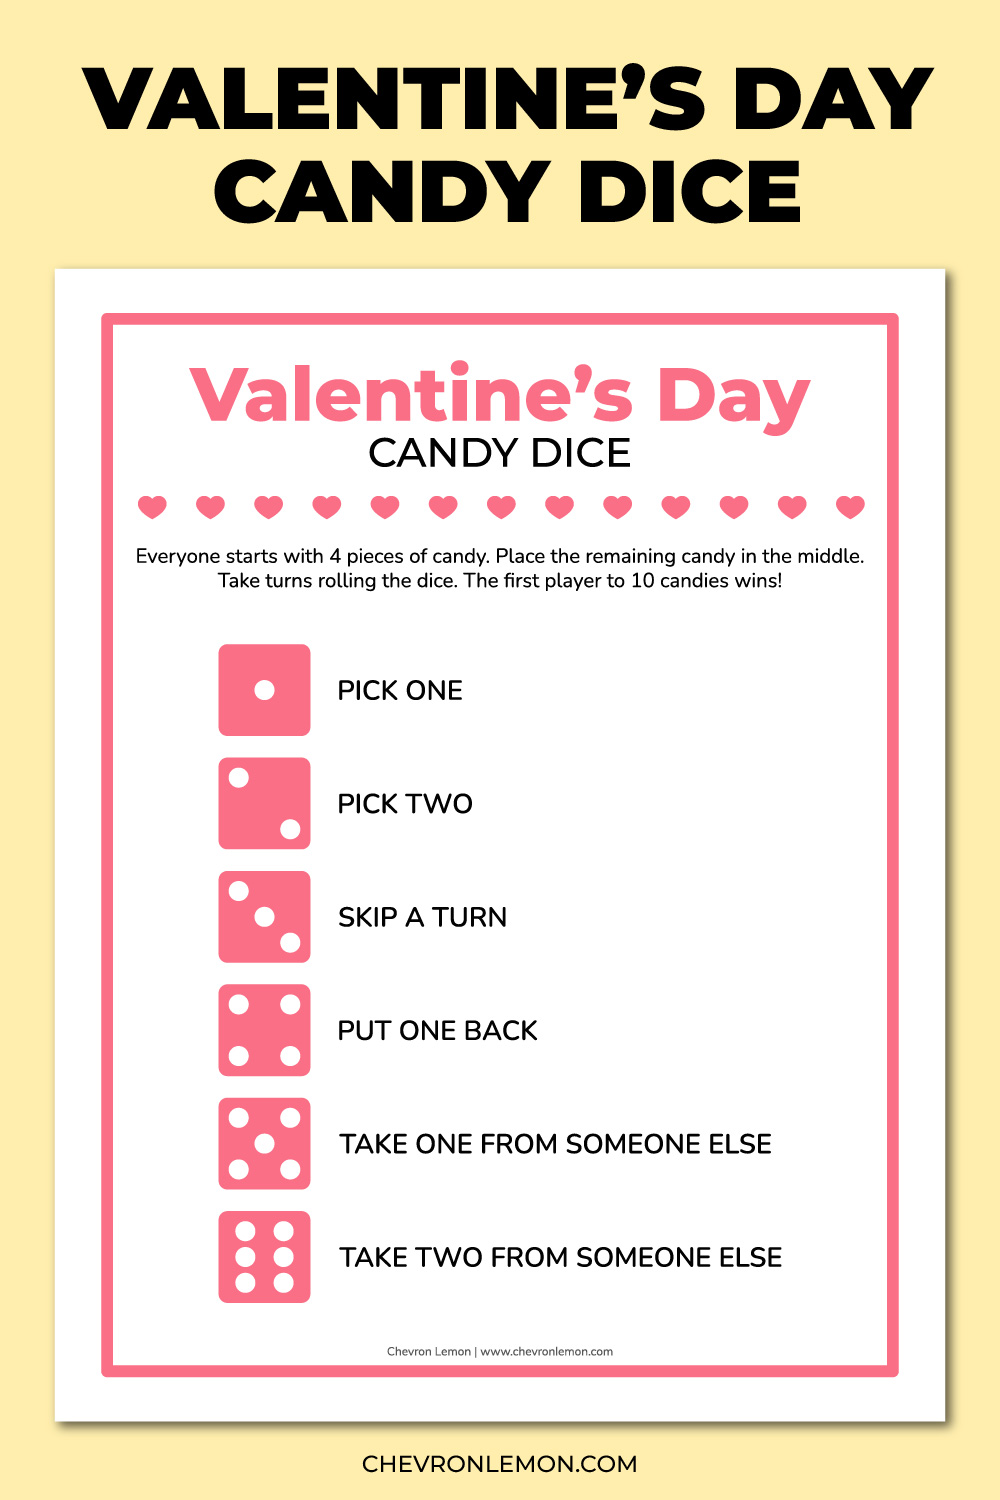 Printable Valentine's Day candy dice game